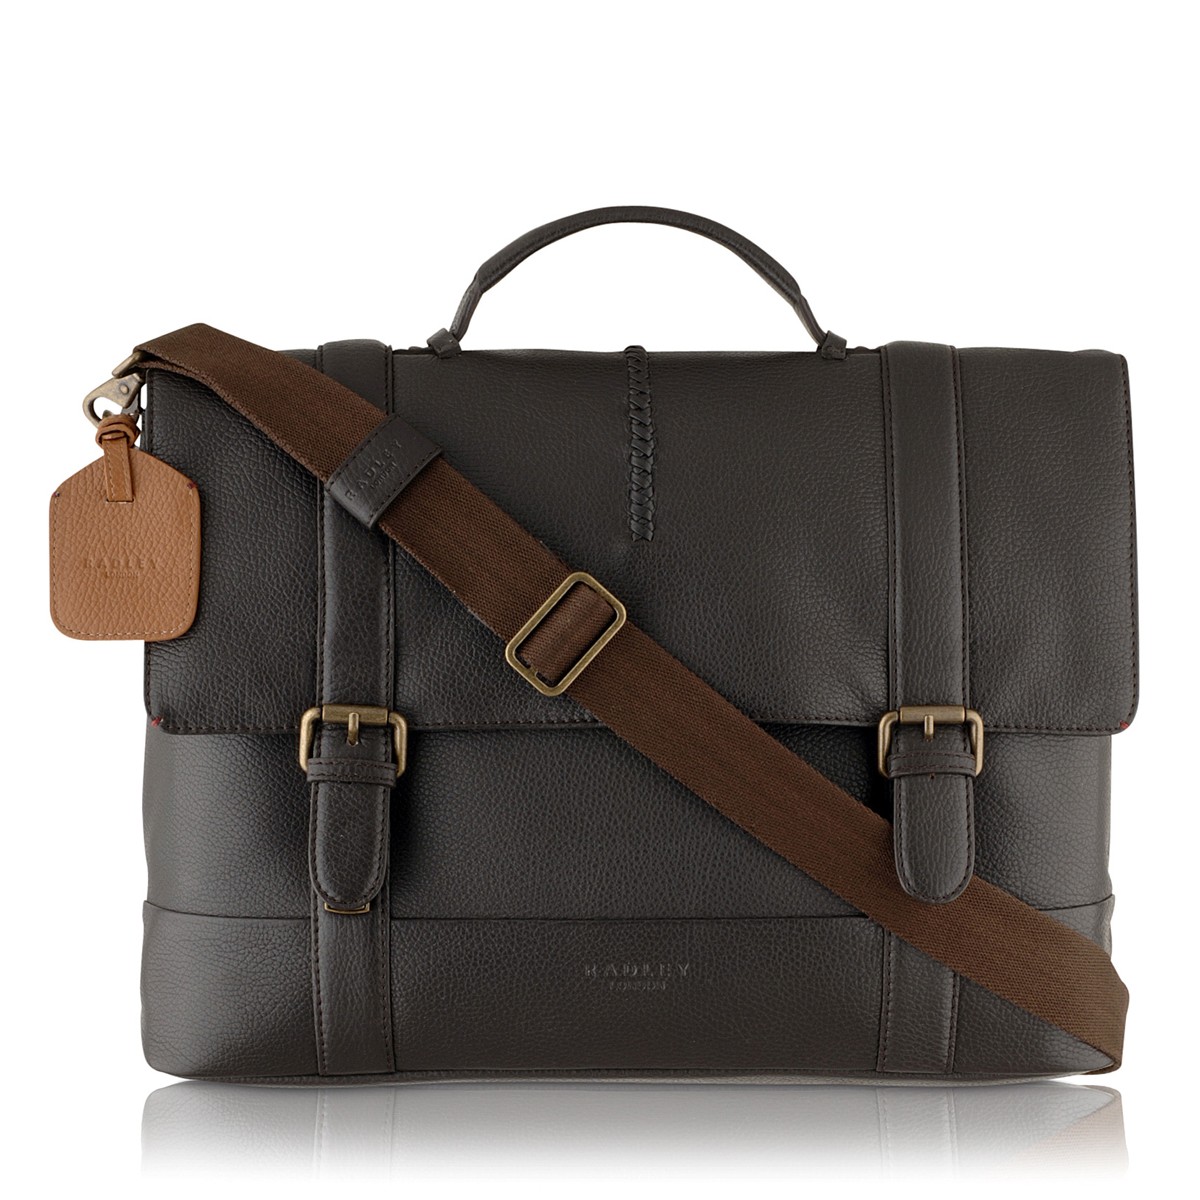 Radley Man bags - Radley Collector review of the Man bags from radley